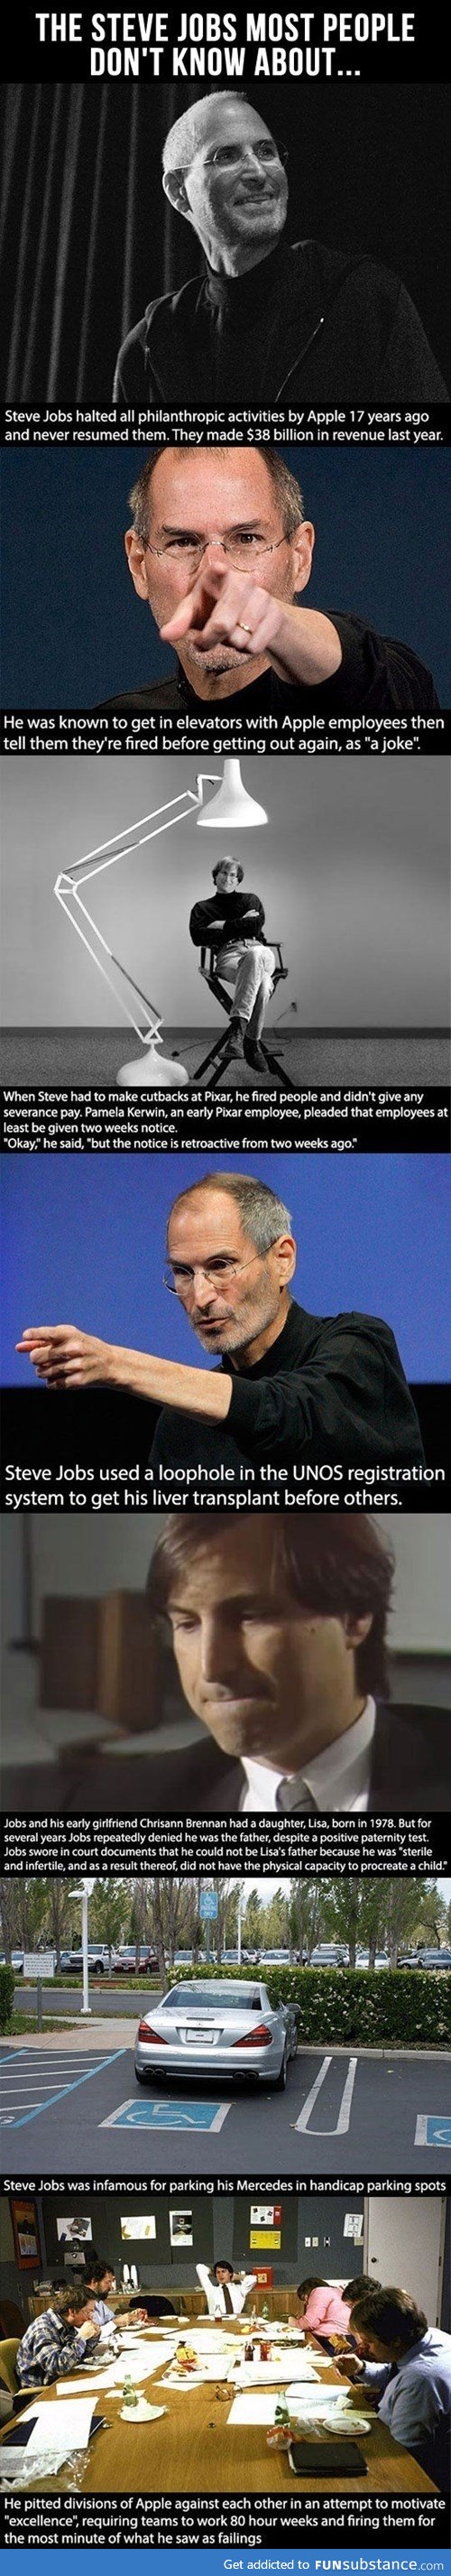 A different side of Steve Jobs